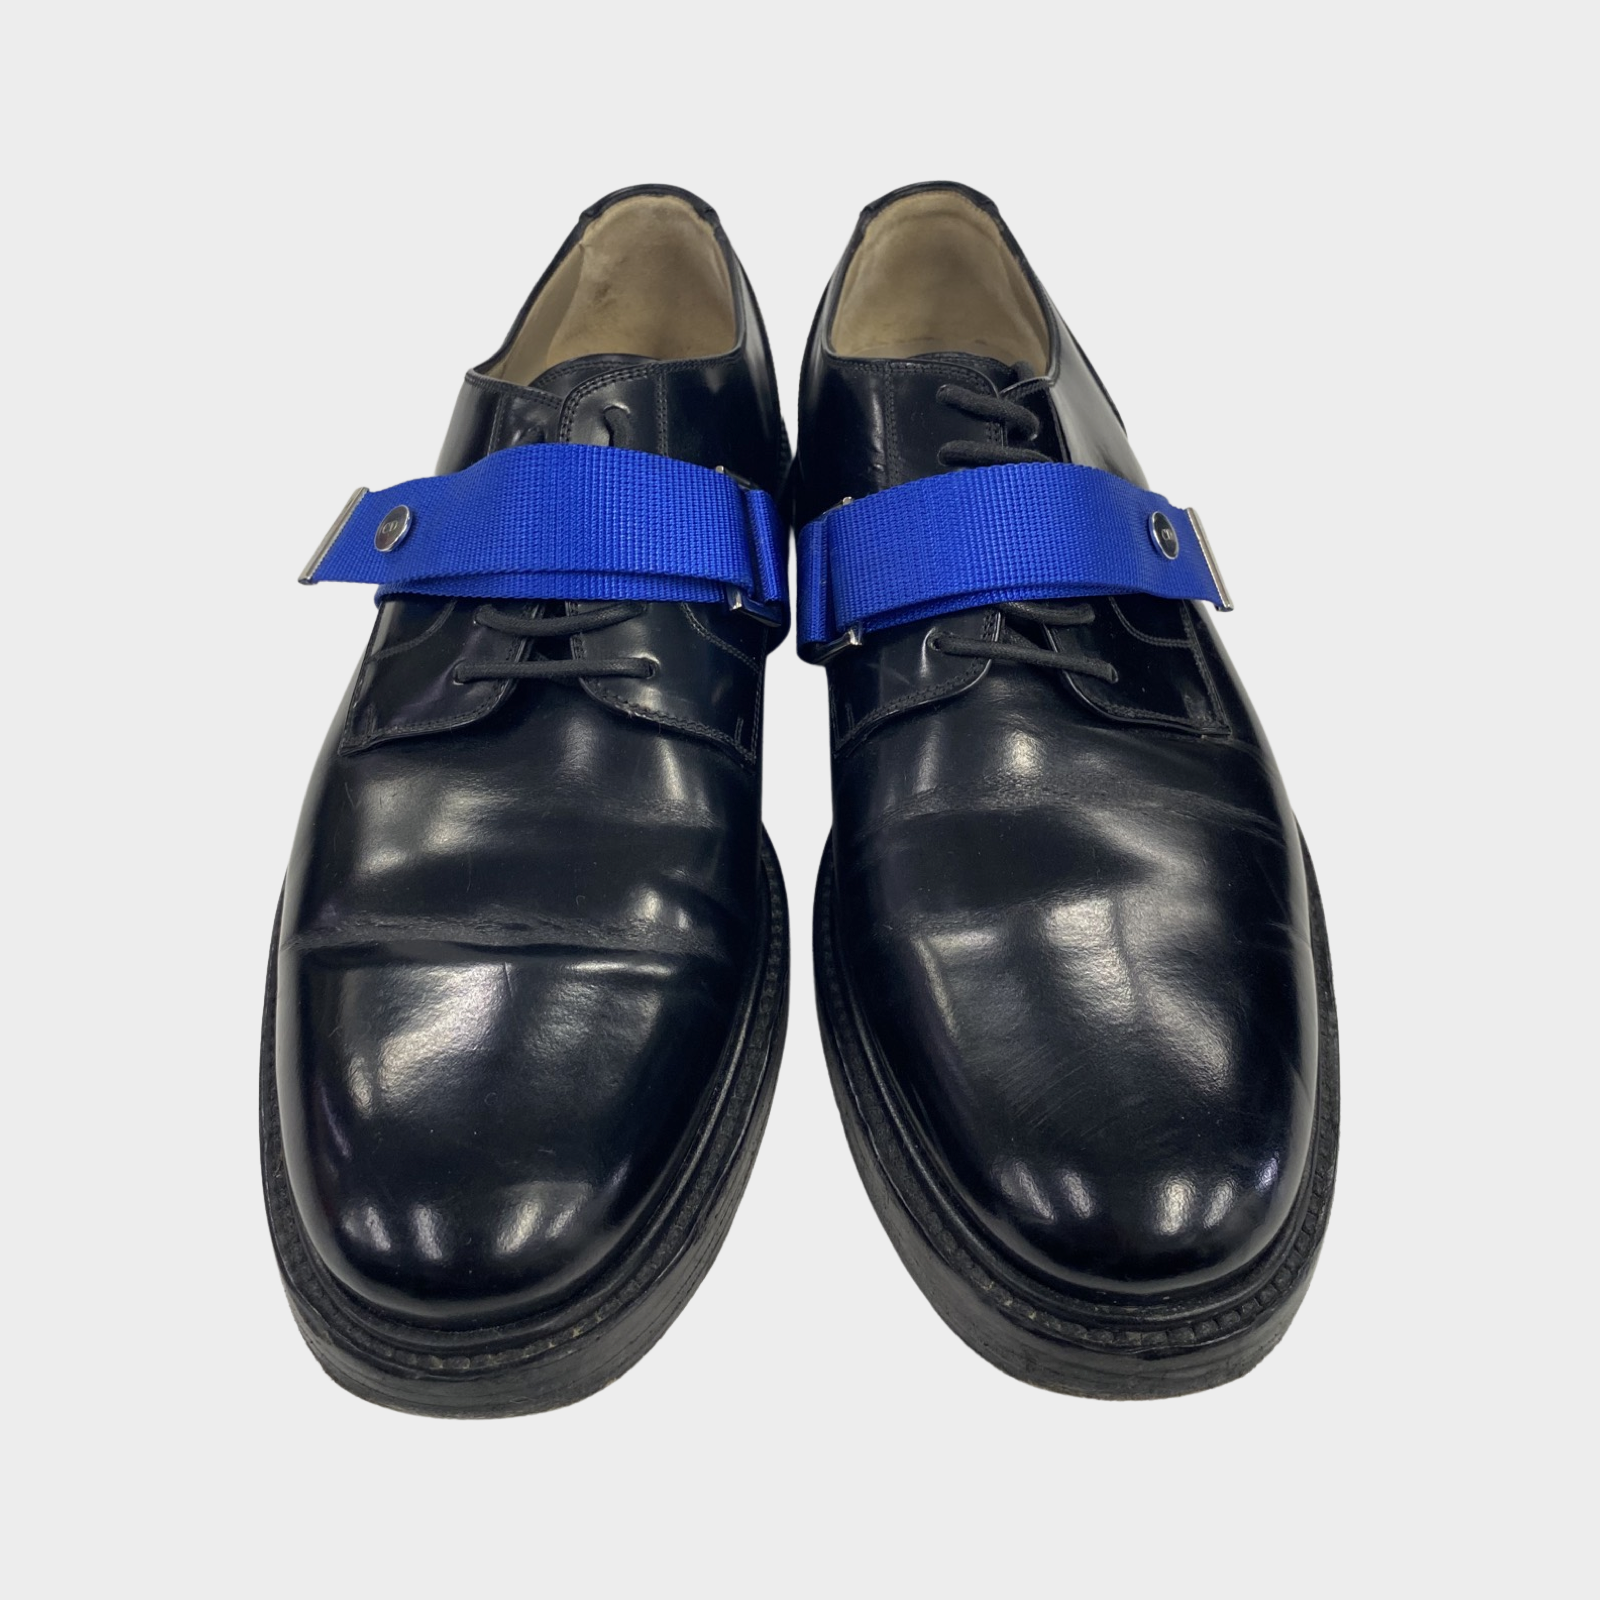 Dior Homme Mens Black Leather Oxford Shoes  Loop Generation